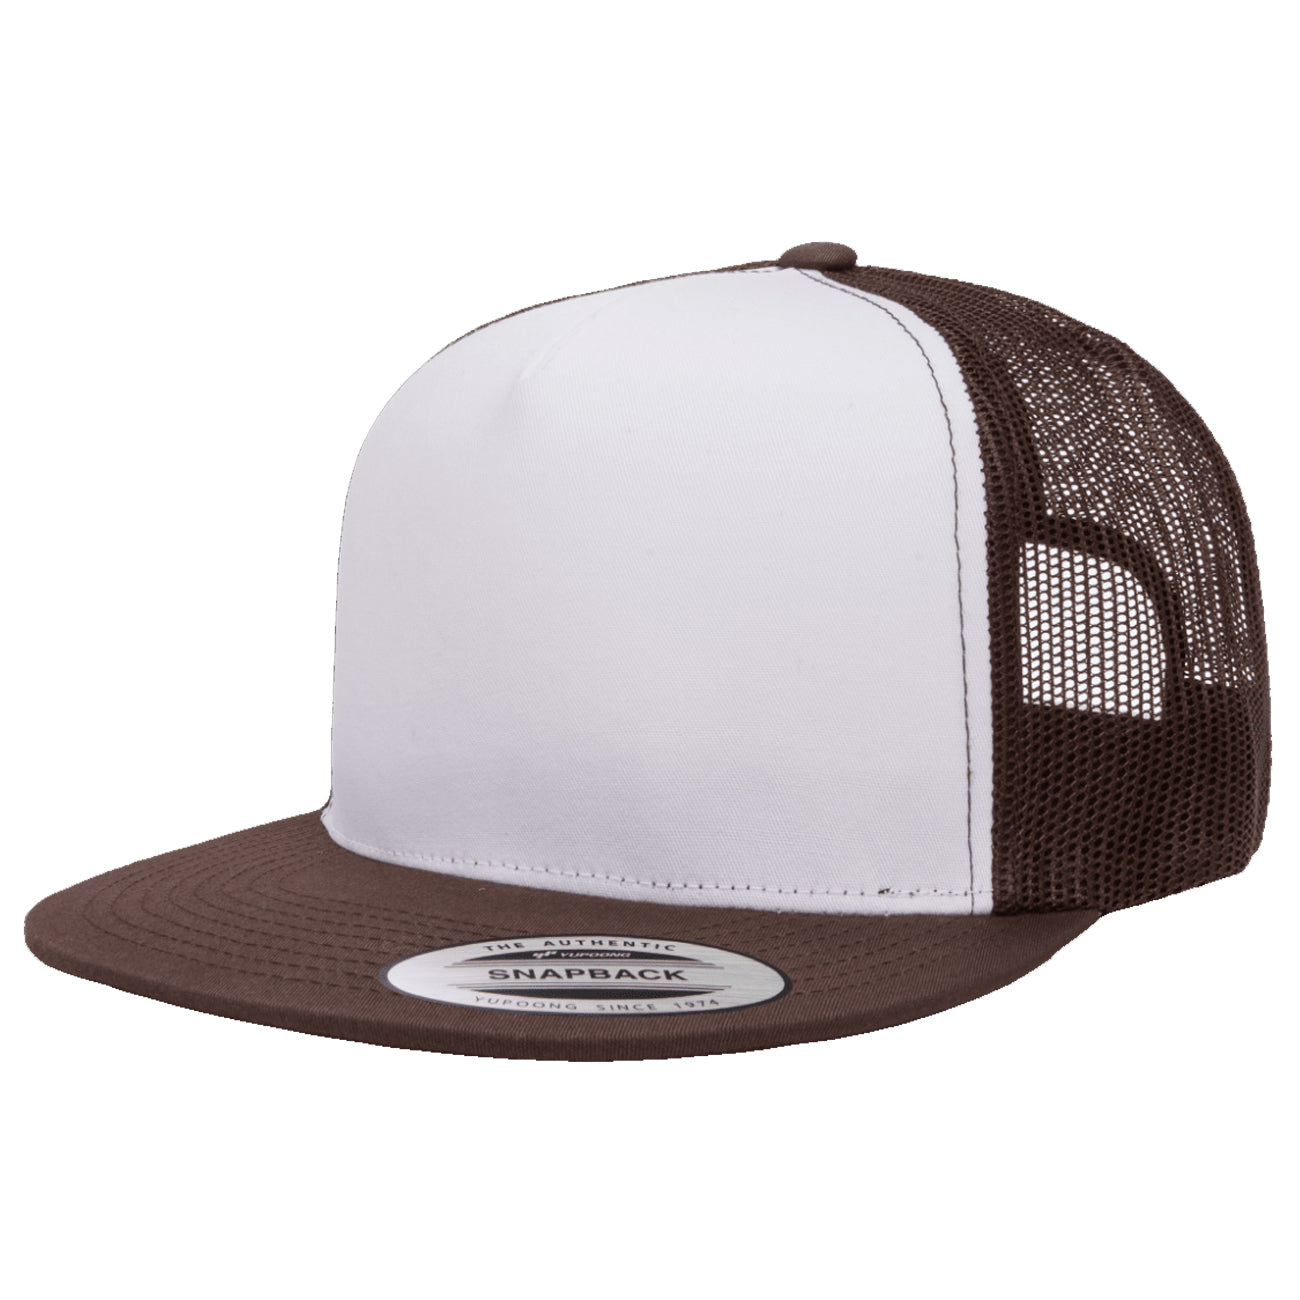 Flexfit Yupoong Classic White Front Panel Adjustable Trucker Cap